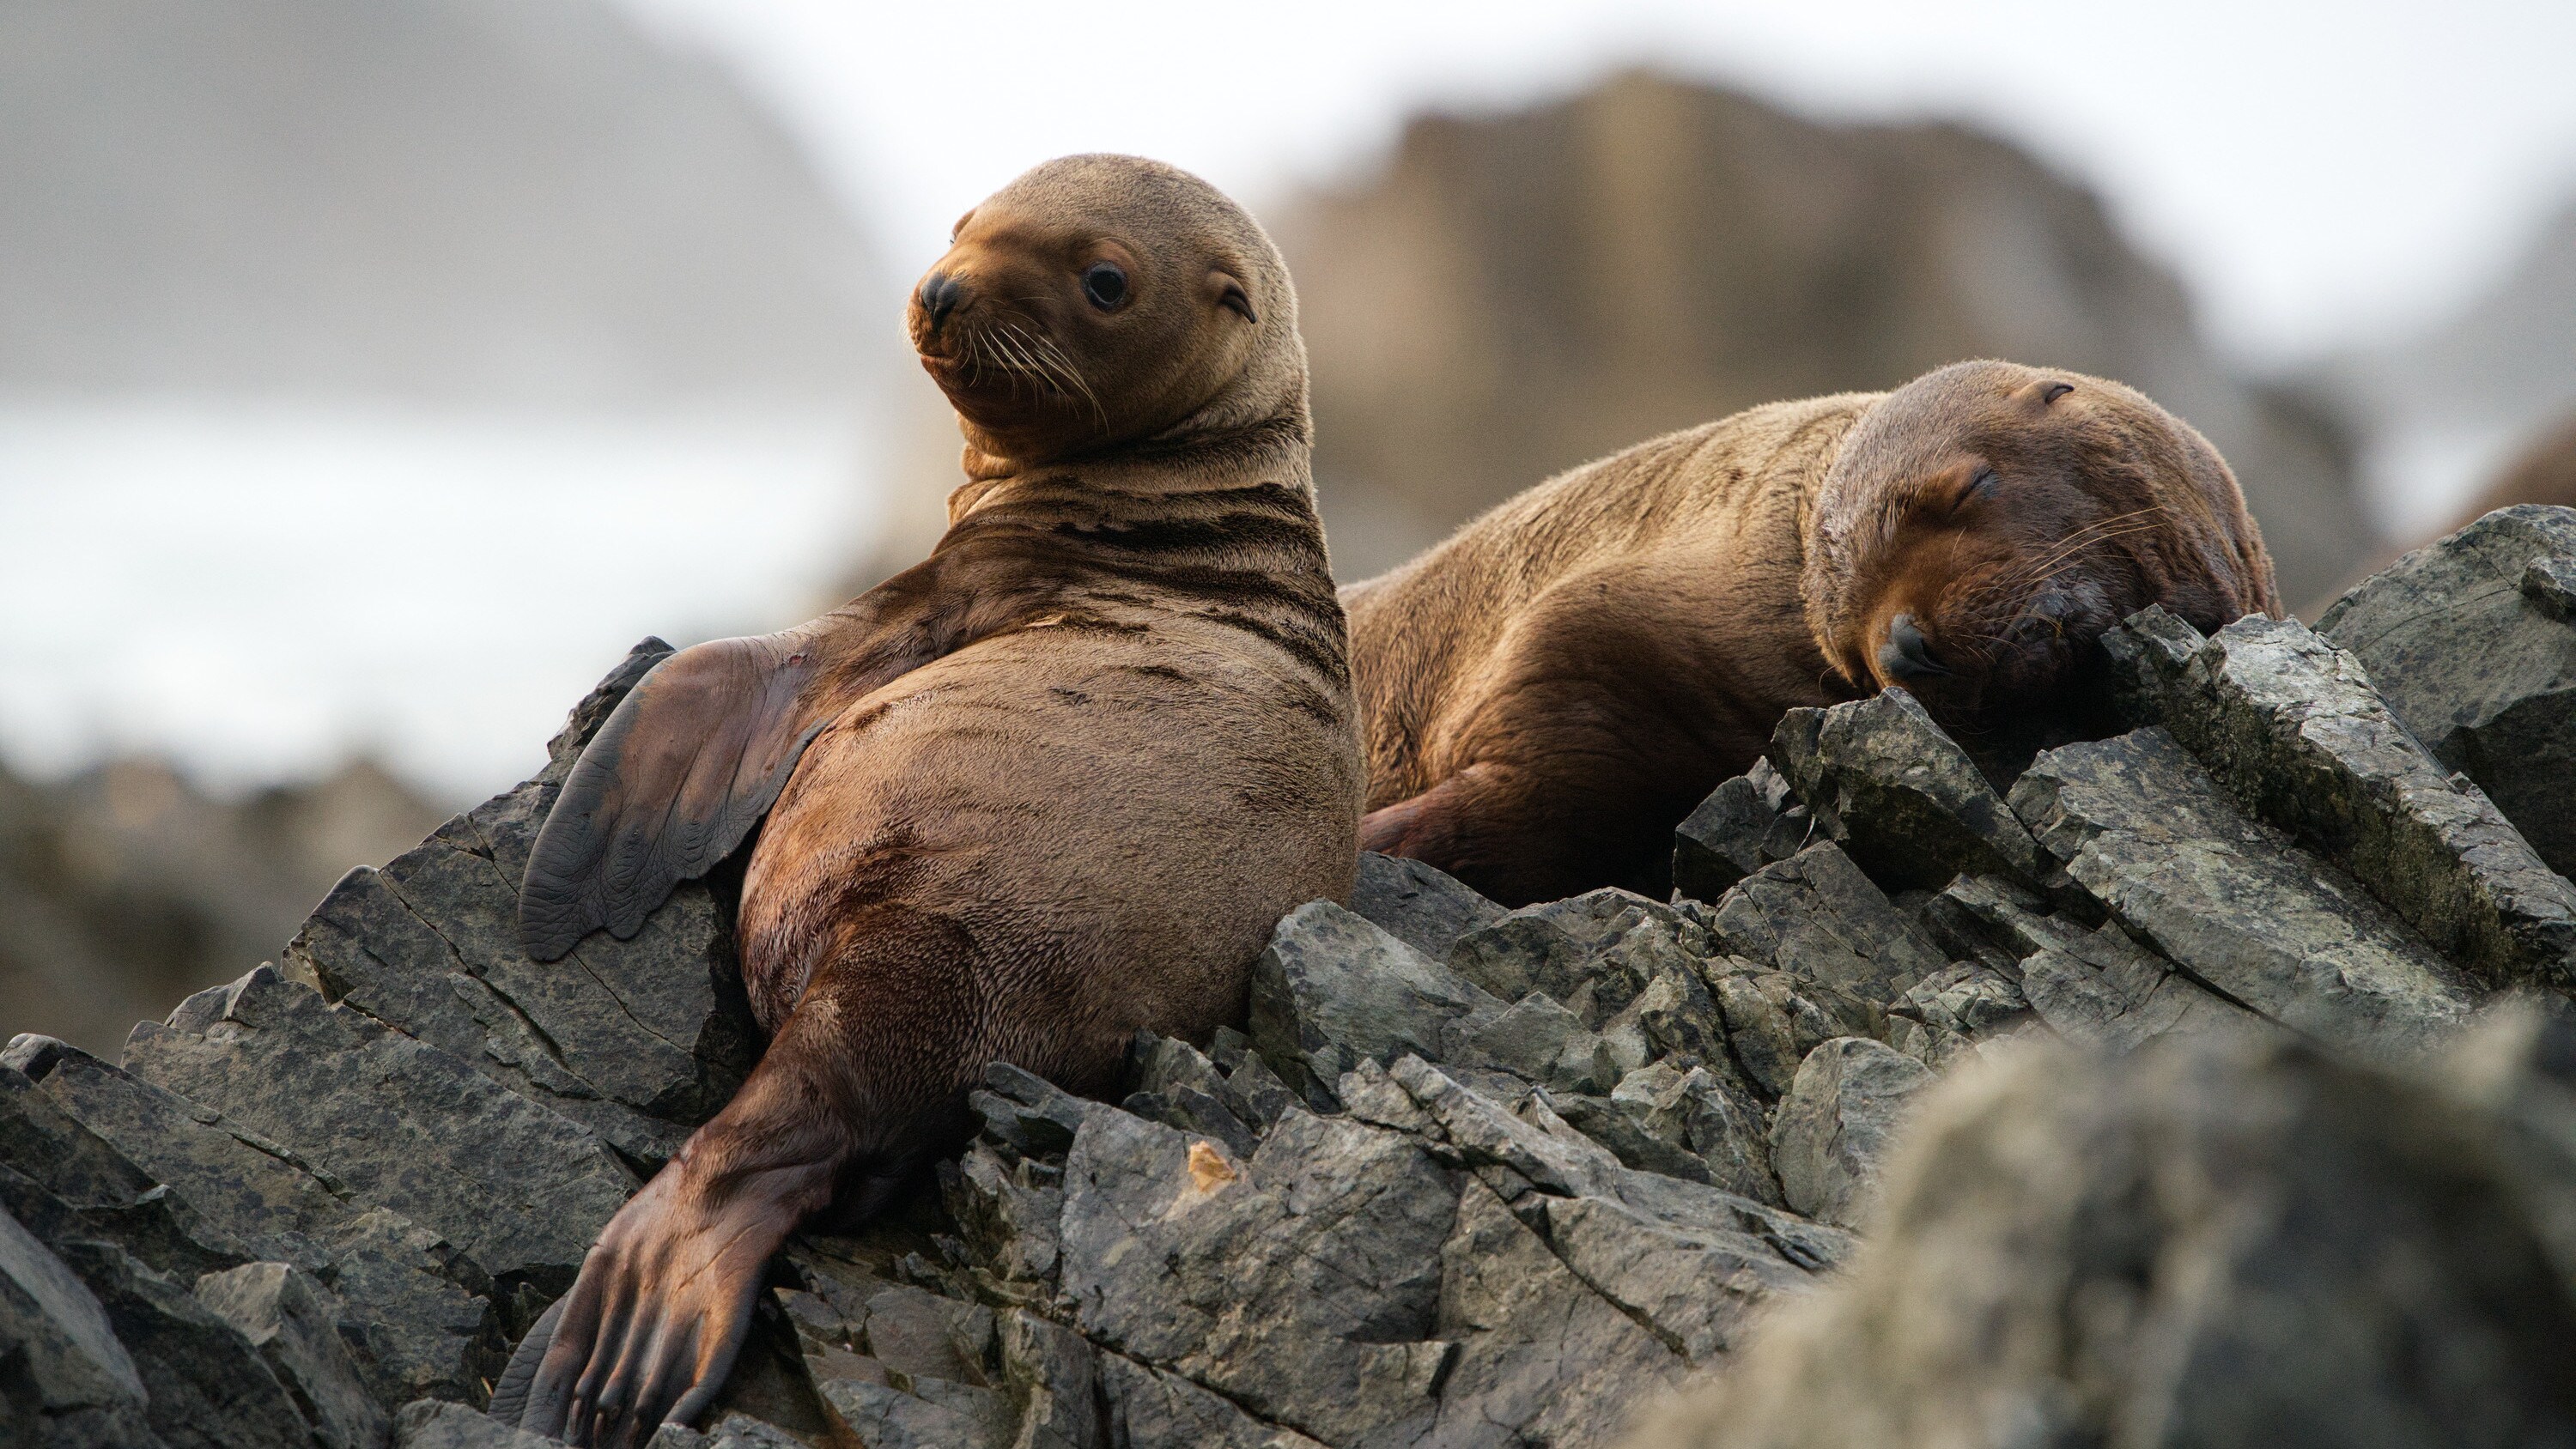 Luna and another pup on the rocks, Triangle Island. (National Geographic for Disney+/Ryan Tidman)